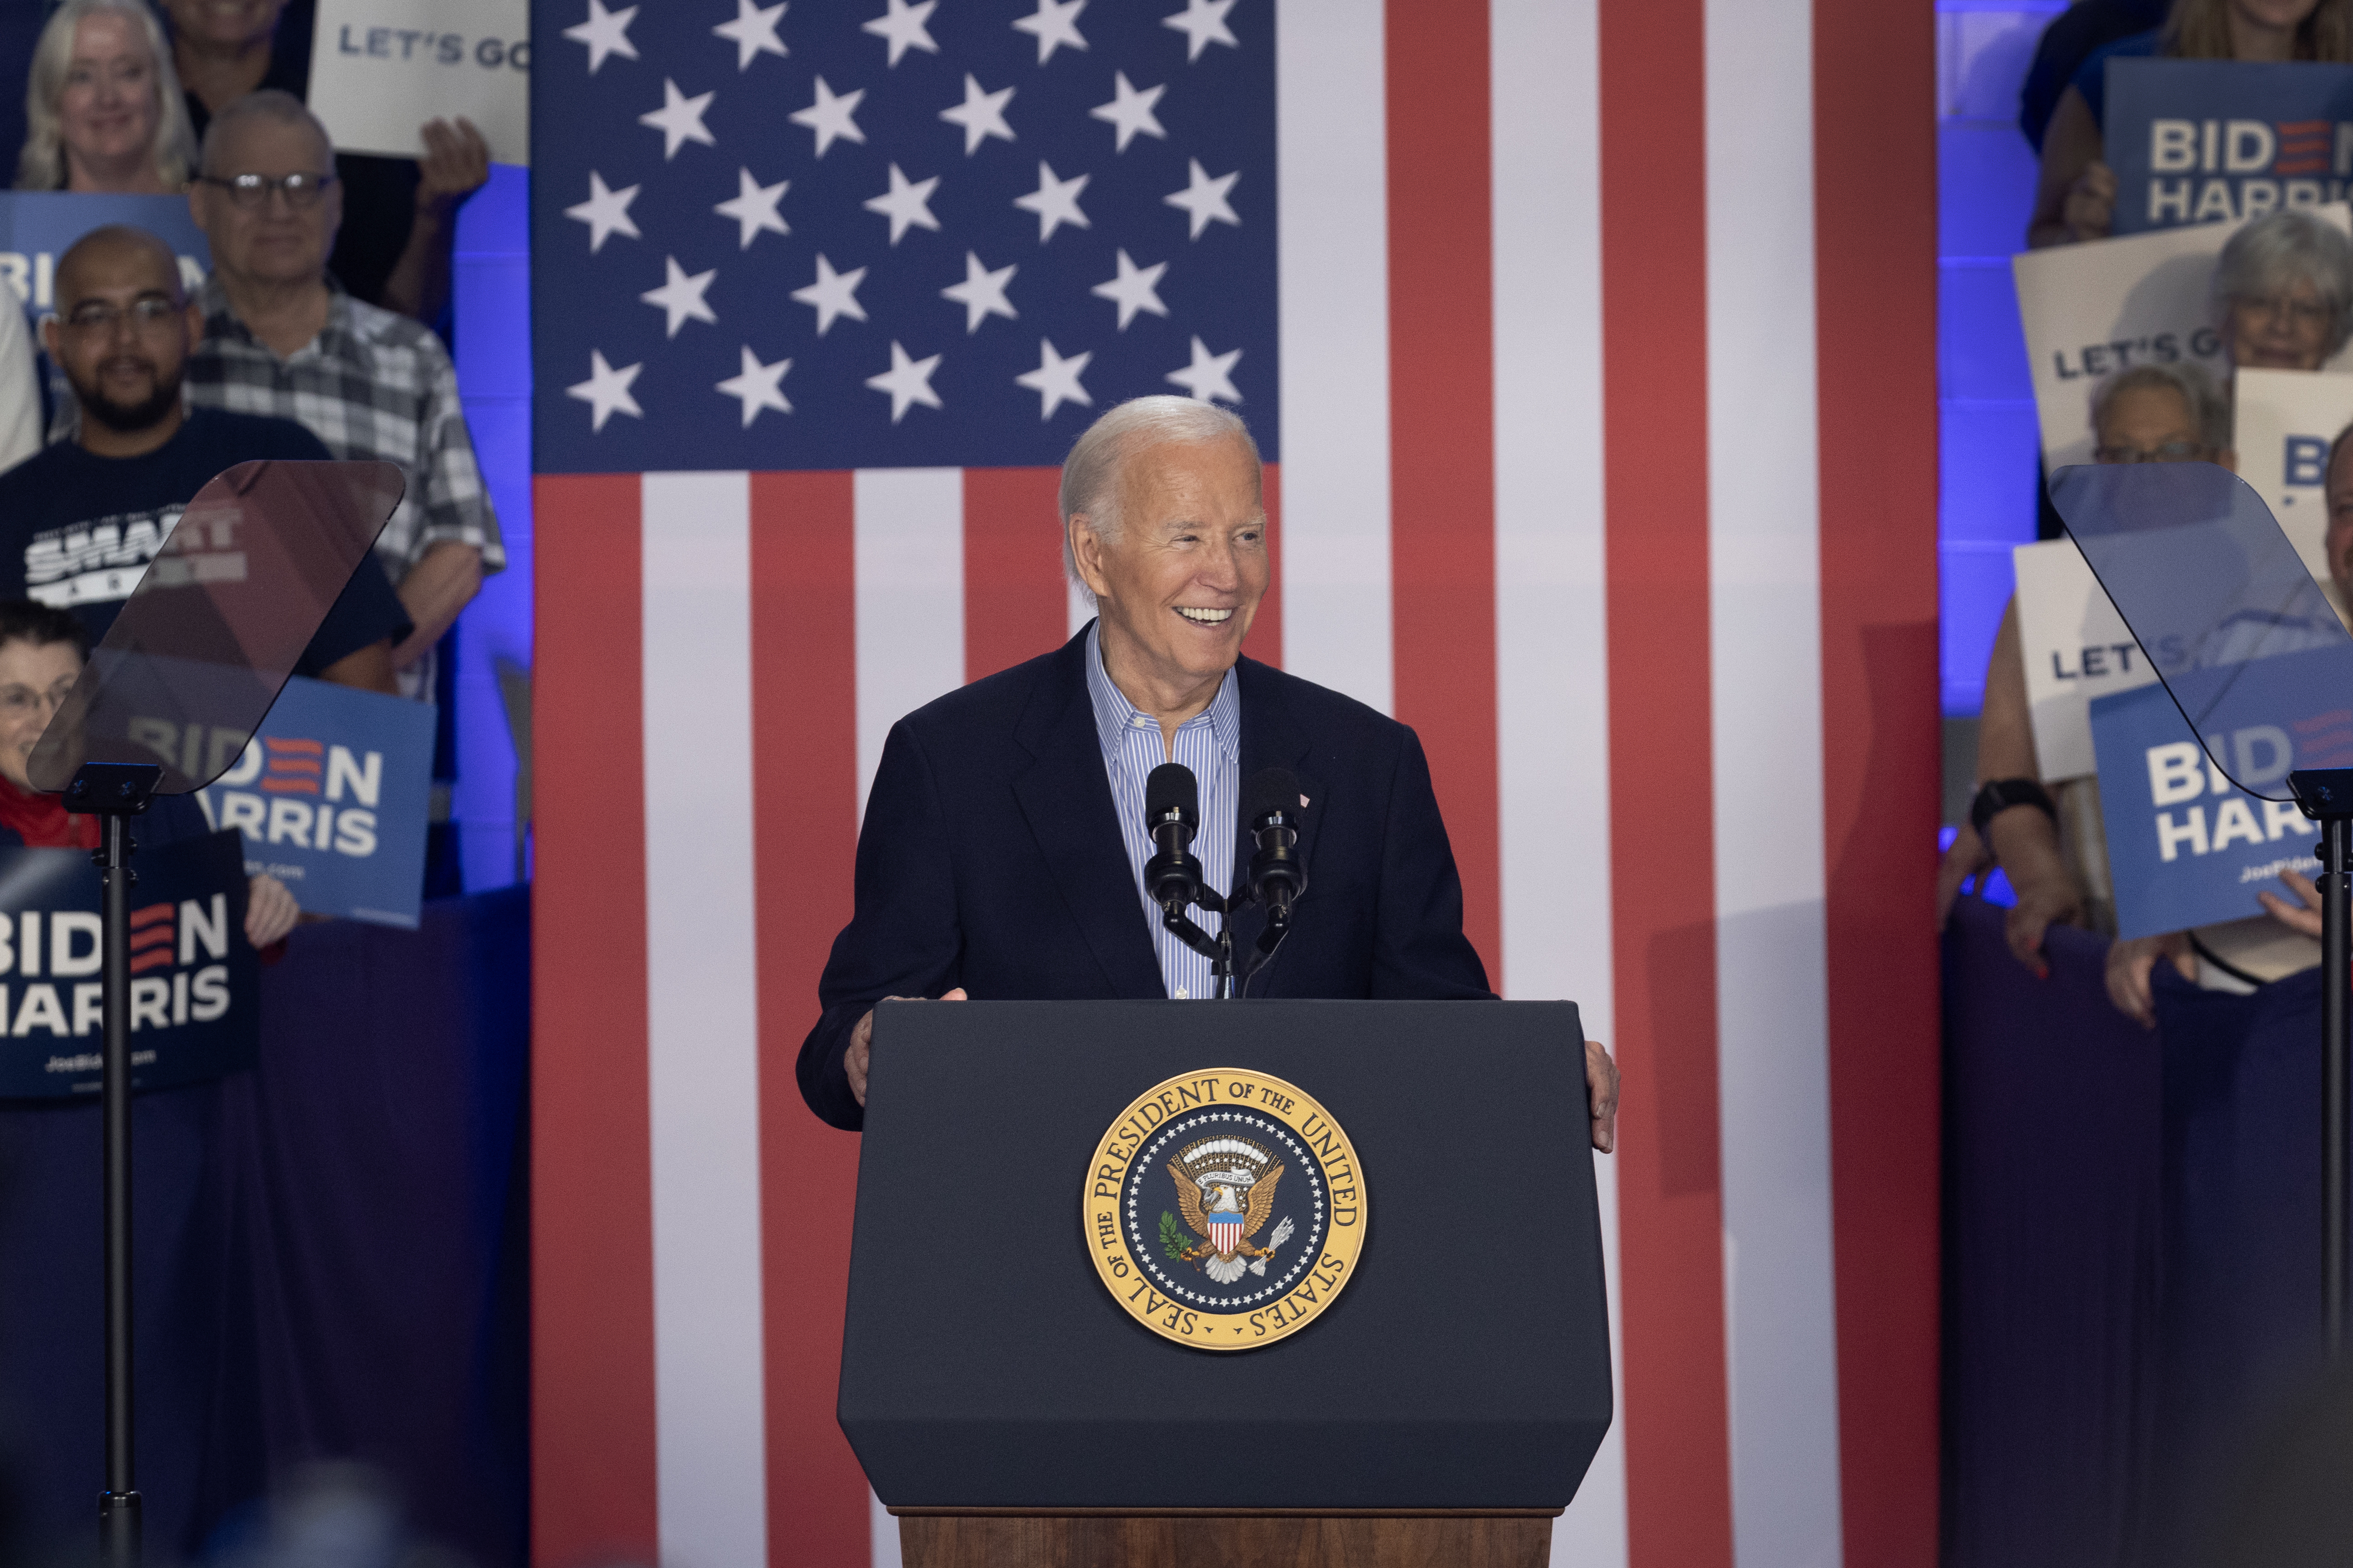 President Joe Biden speaking at a podium with an American flag backdrop. Audience members hold &quot;Biden-Harris&quot; and &quot;Let&#x27;s Go&quot; signs